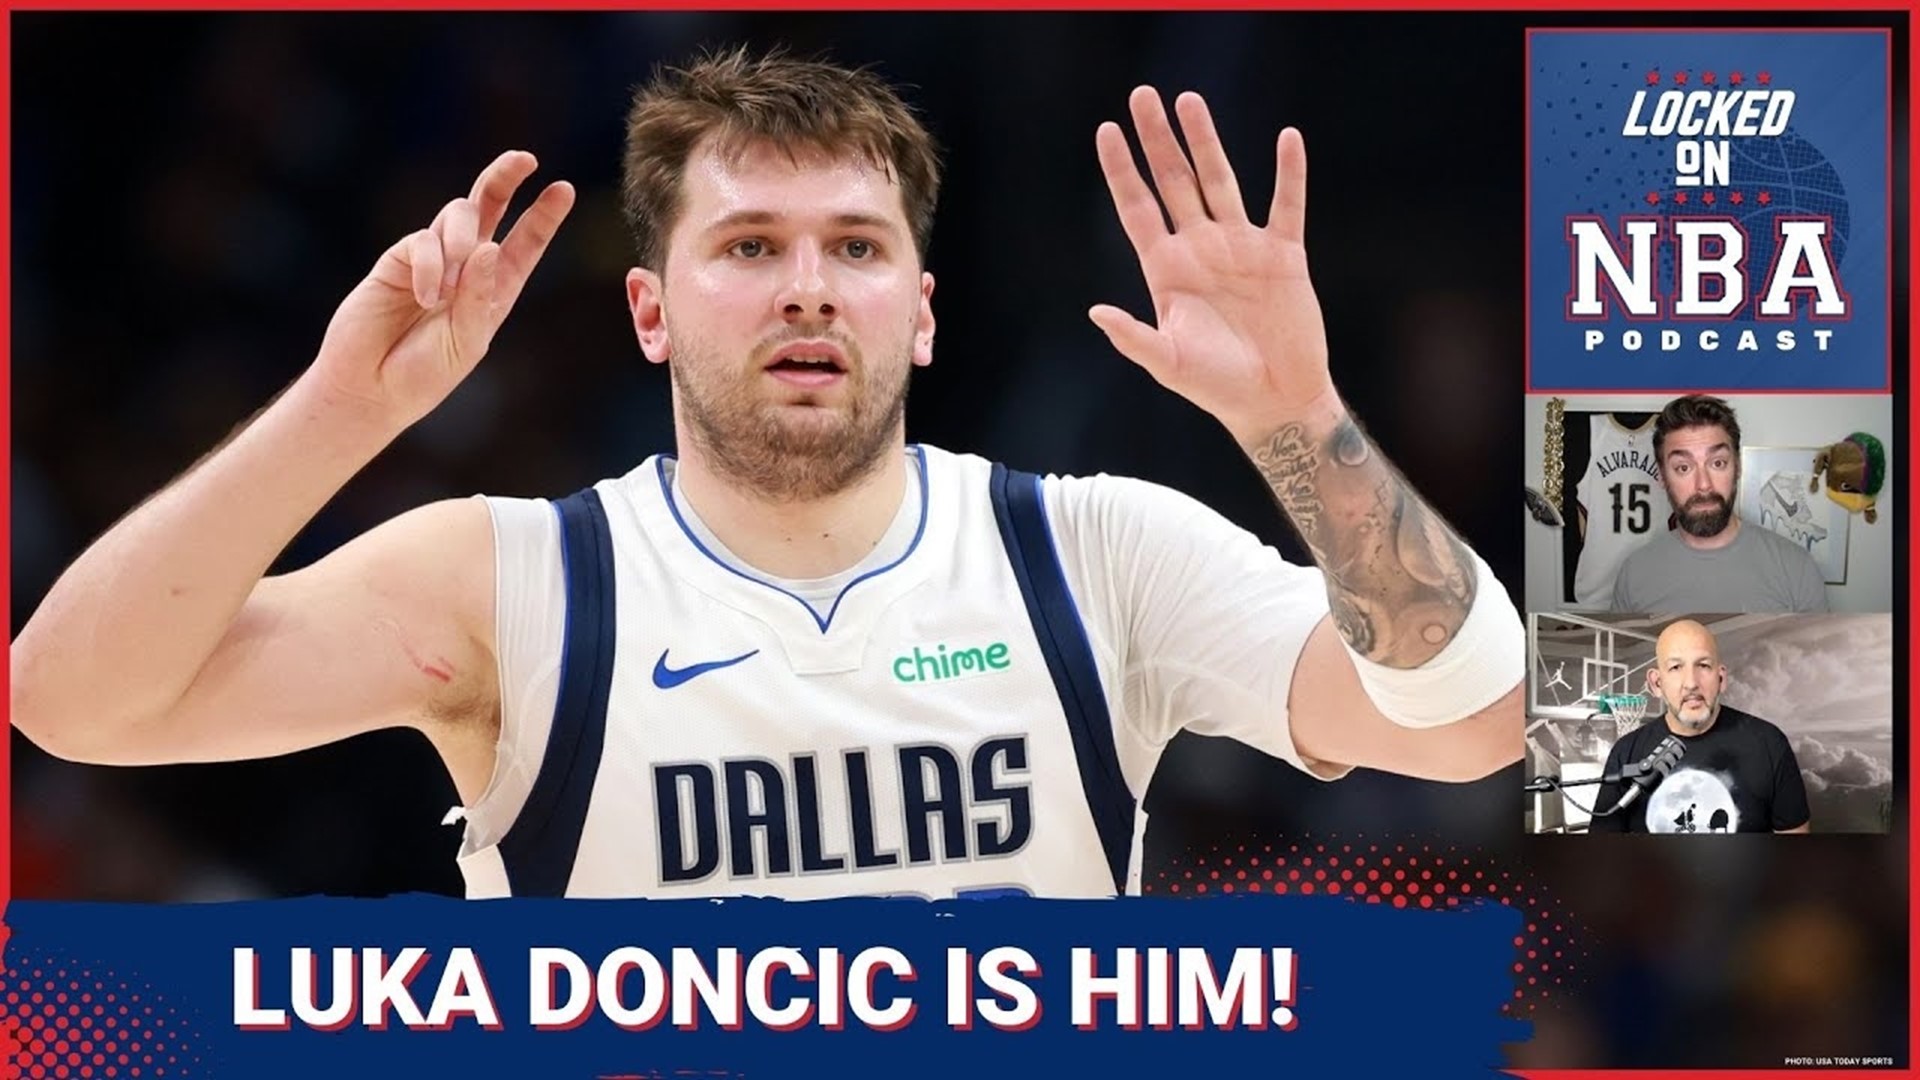 Luka Doncic not only scored but played well defensively as the Dallas Mavericks beat the Los Angeles Clippers even though Kawhi Leonard returned for LA.